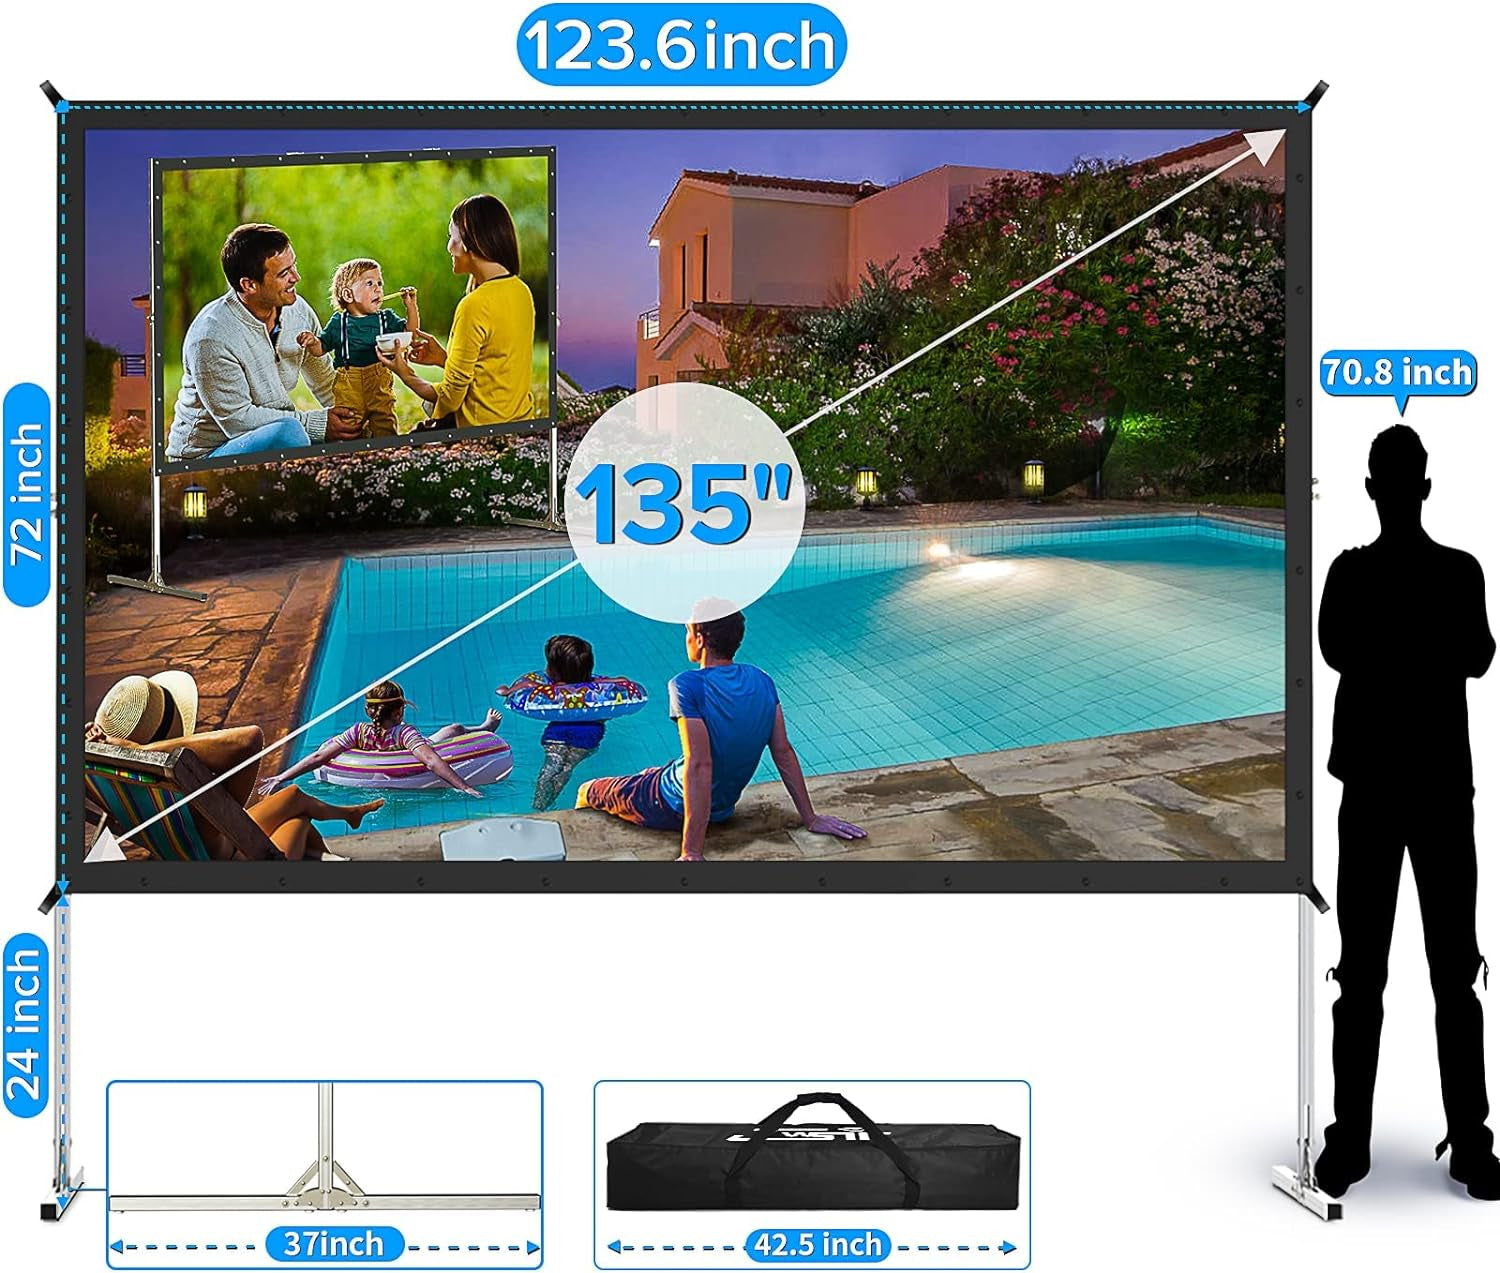 Projector Screen and Stand, 135 Inch Outdoor Movie Screen-Upgraded 3 Layers PVC 16:9 Outdoor Projector Screen,Portable Video Projection Screen with Carrying Bag for Home Theater Backyard